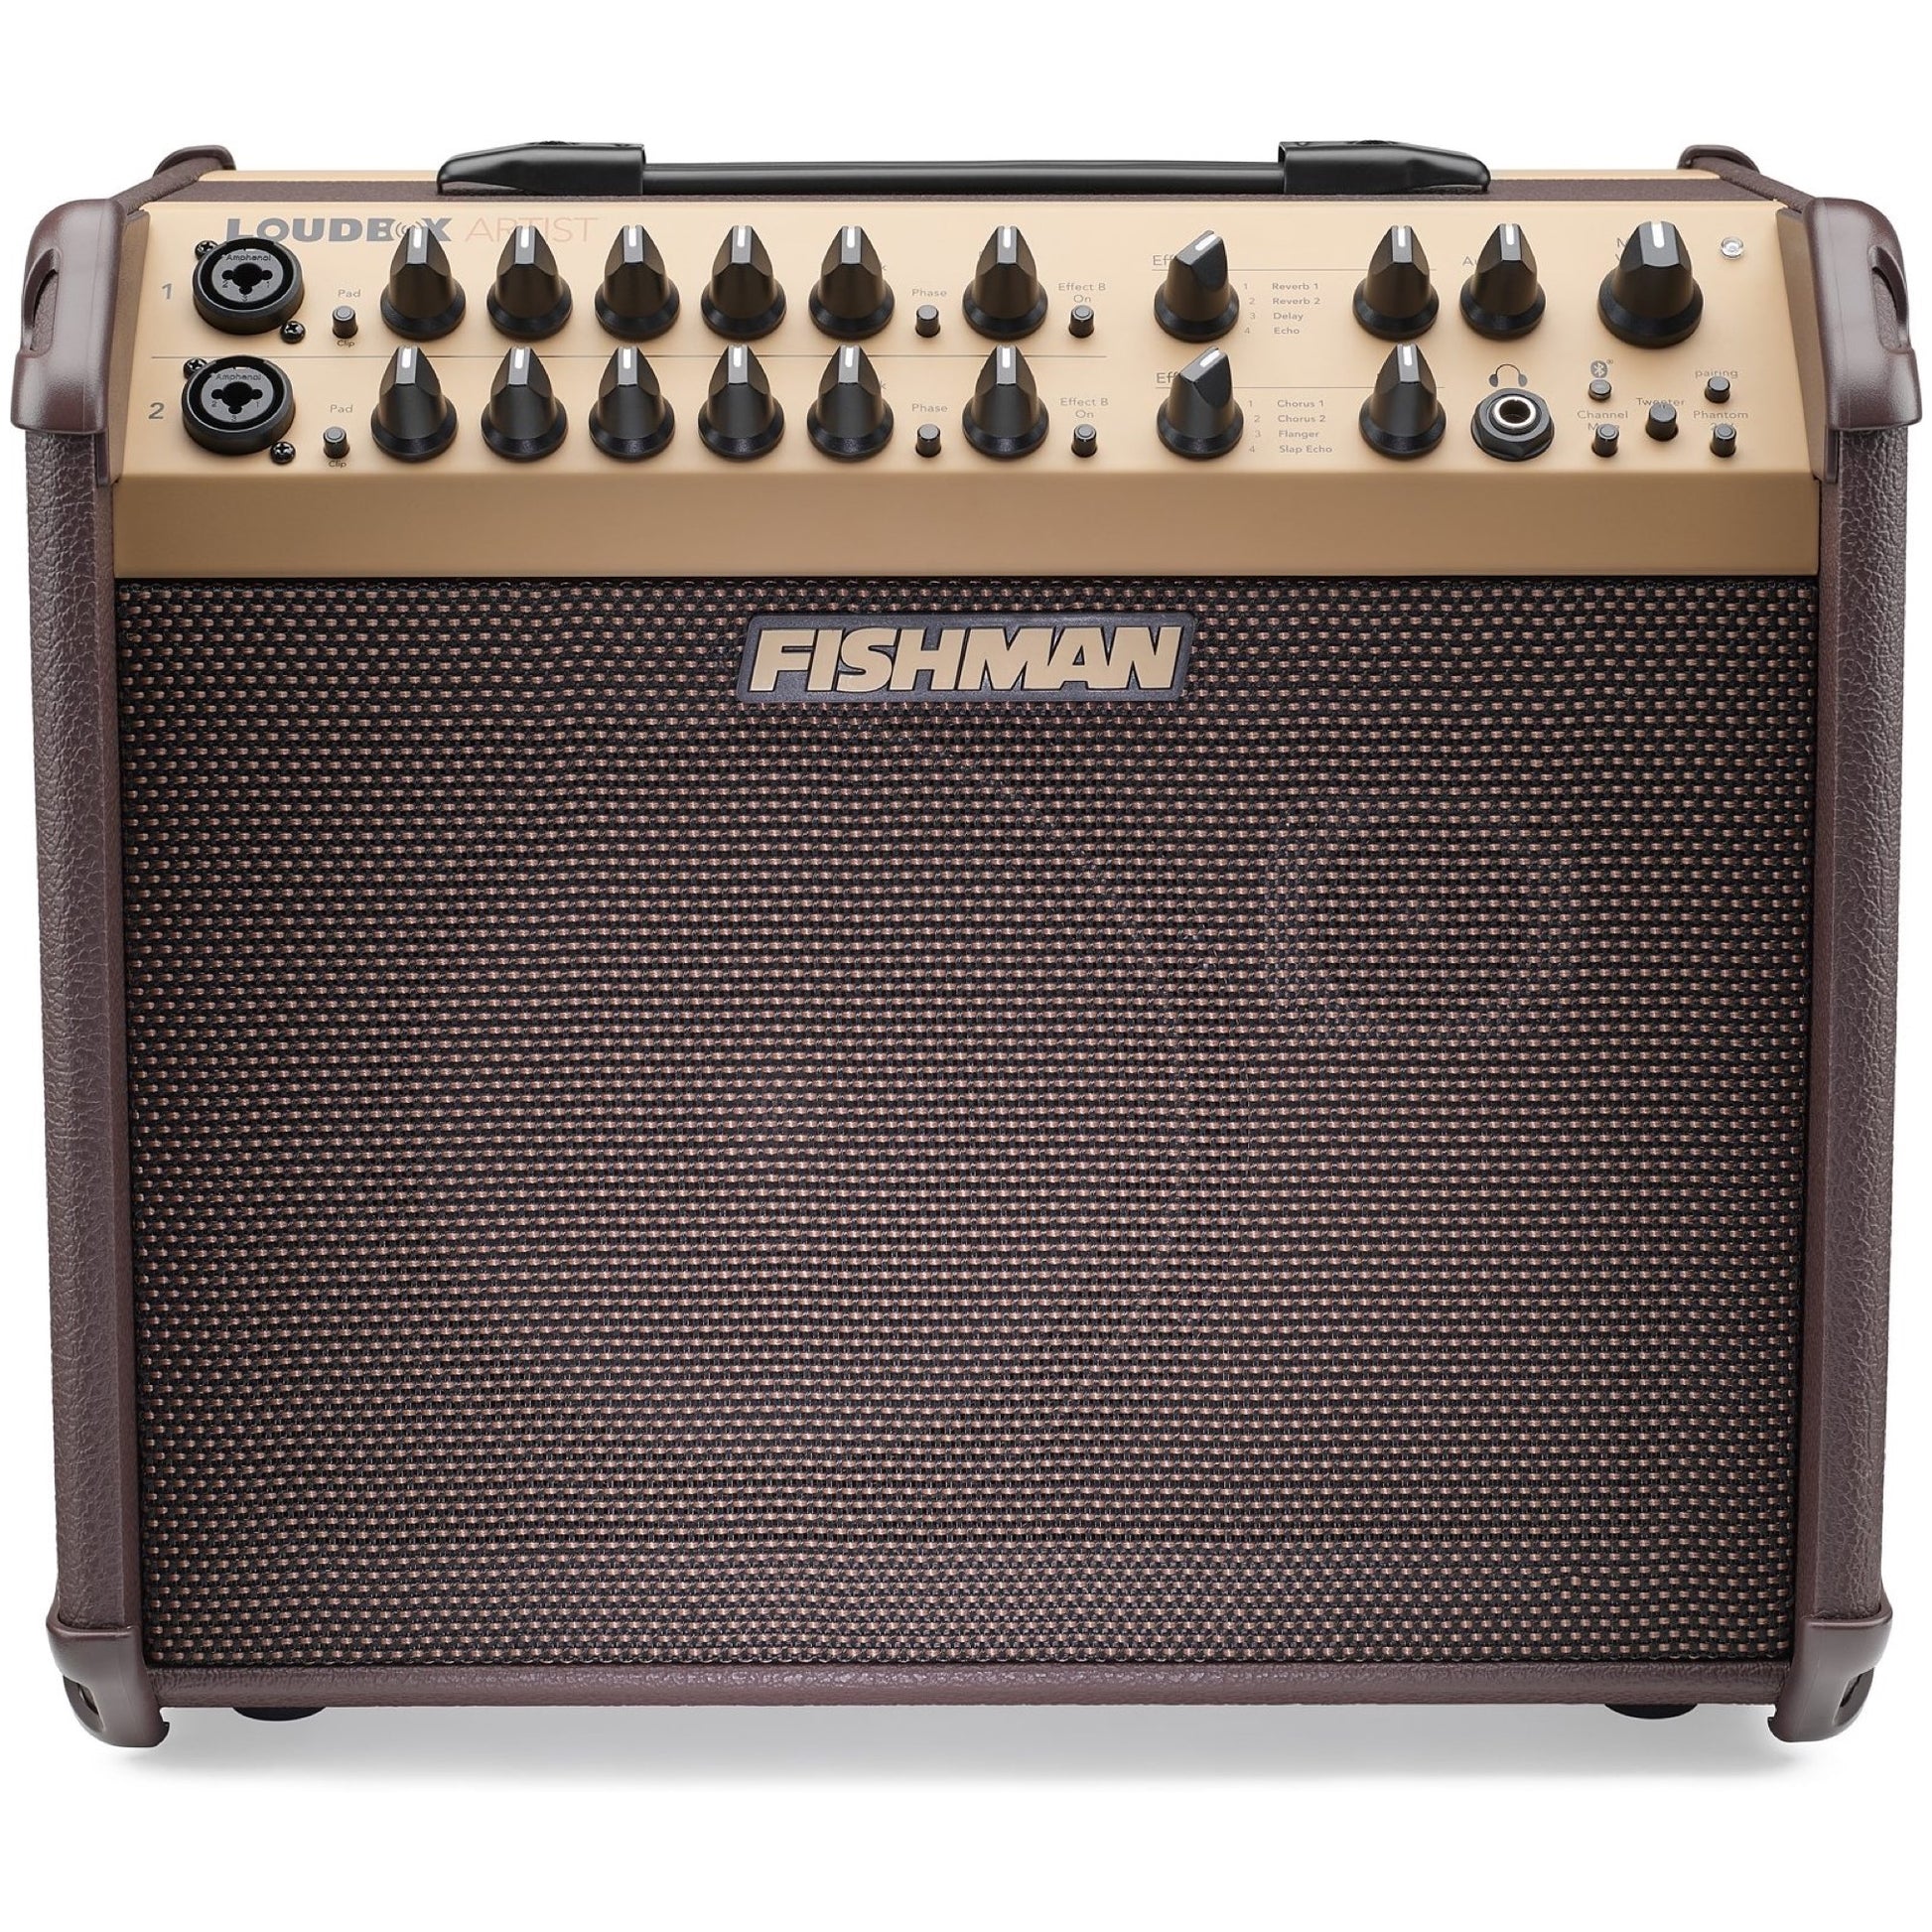 Fishman Loudbox Artist Acoustic Guitar Combo Amplifier with Bluetooth (120 Watts)